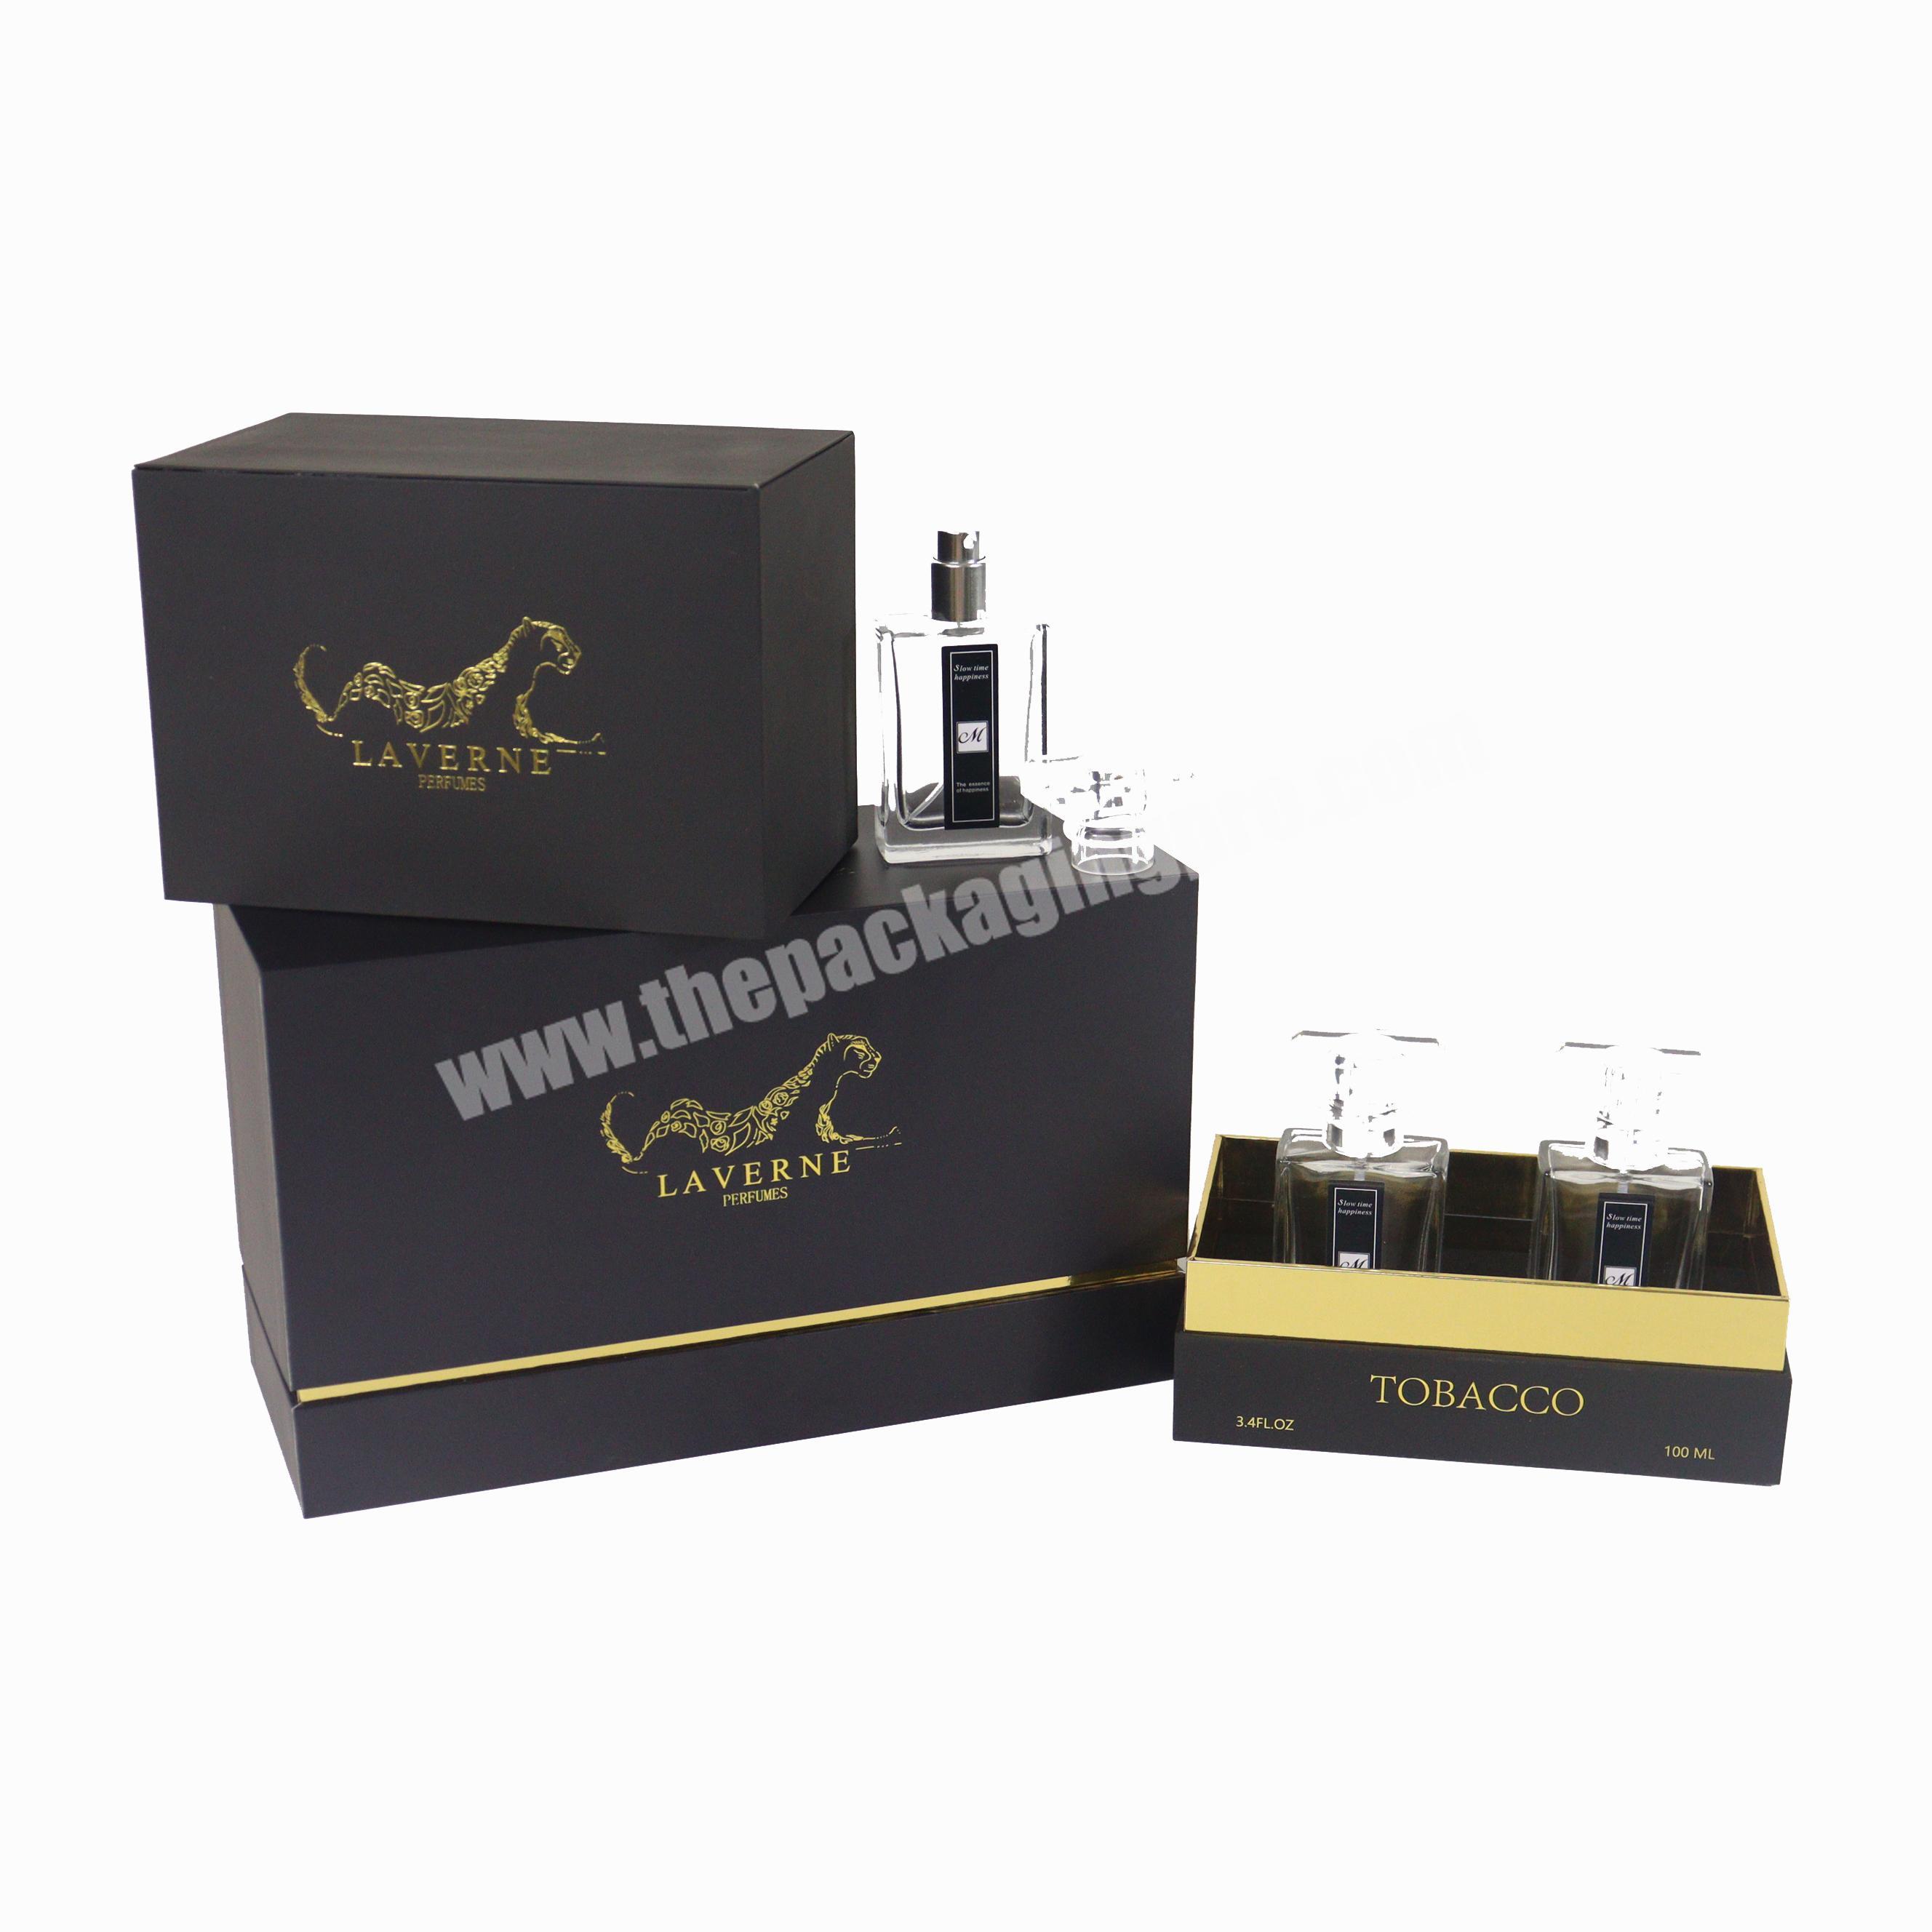 Black with gold edeg perfume box packaging luxury gift box with inner card